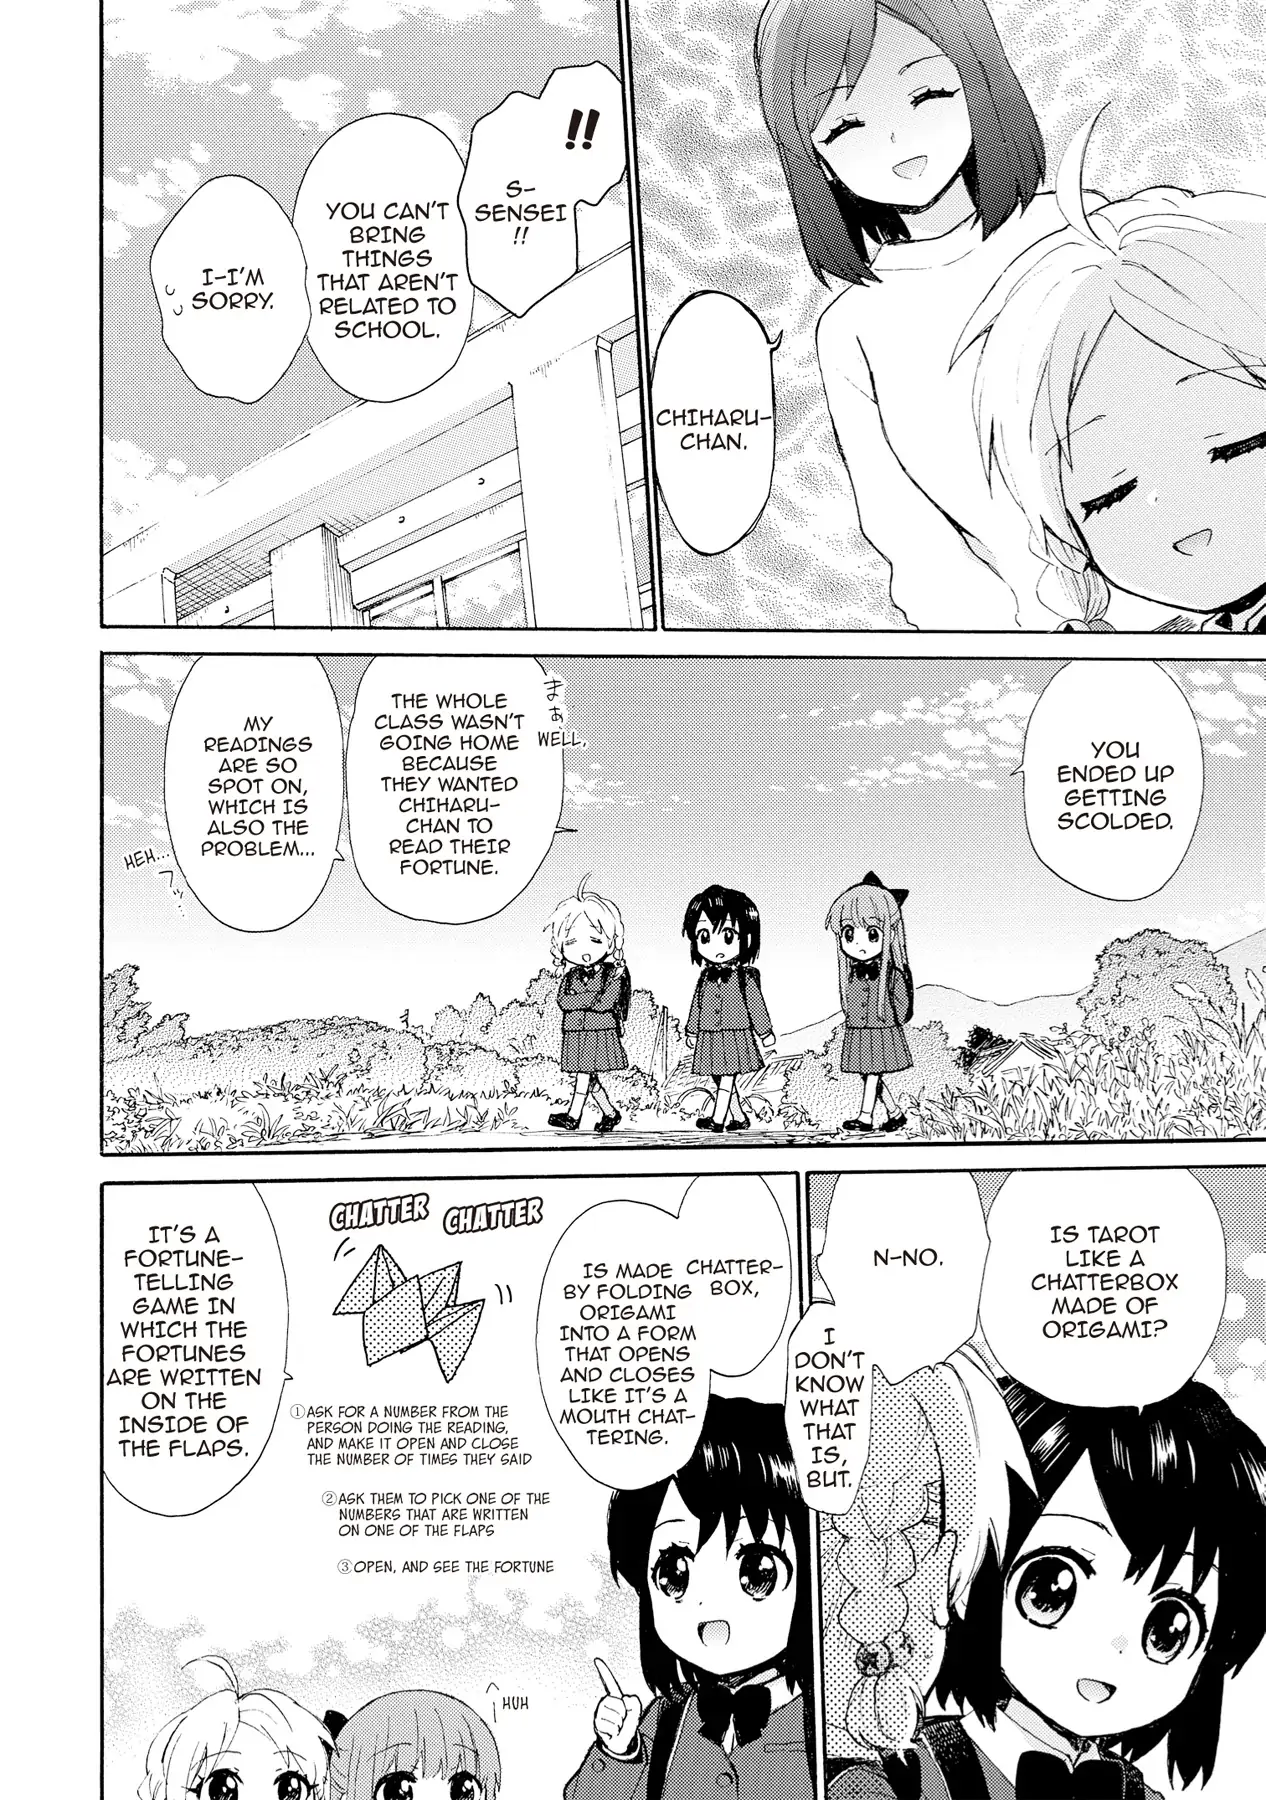 The Cute Little Granny Girl Hinata-chan - chapter 72 - #4